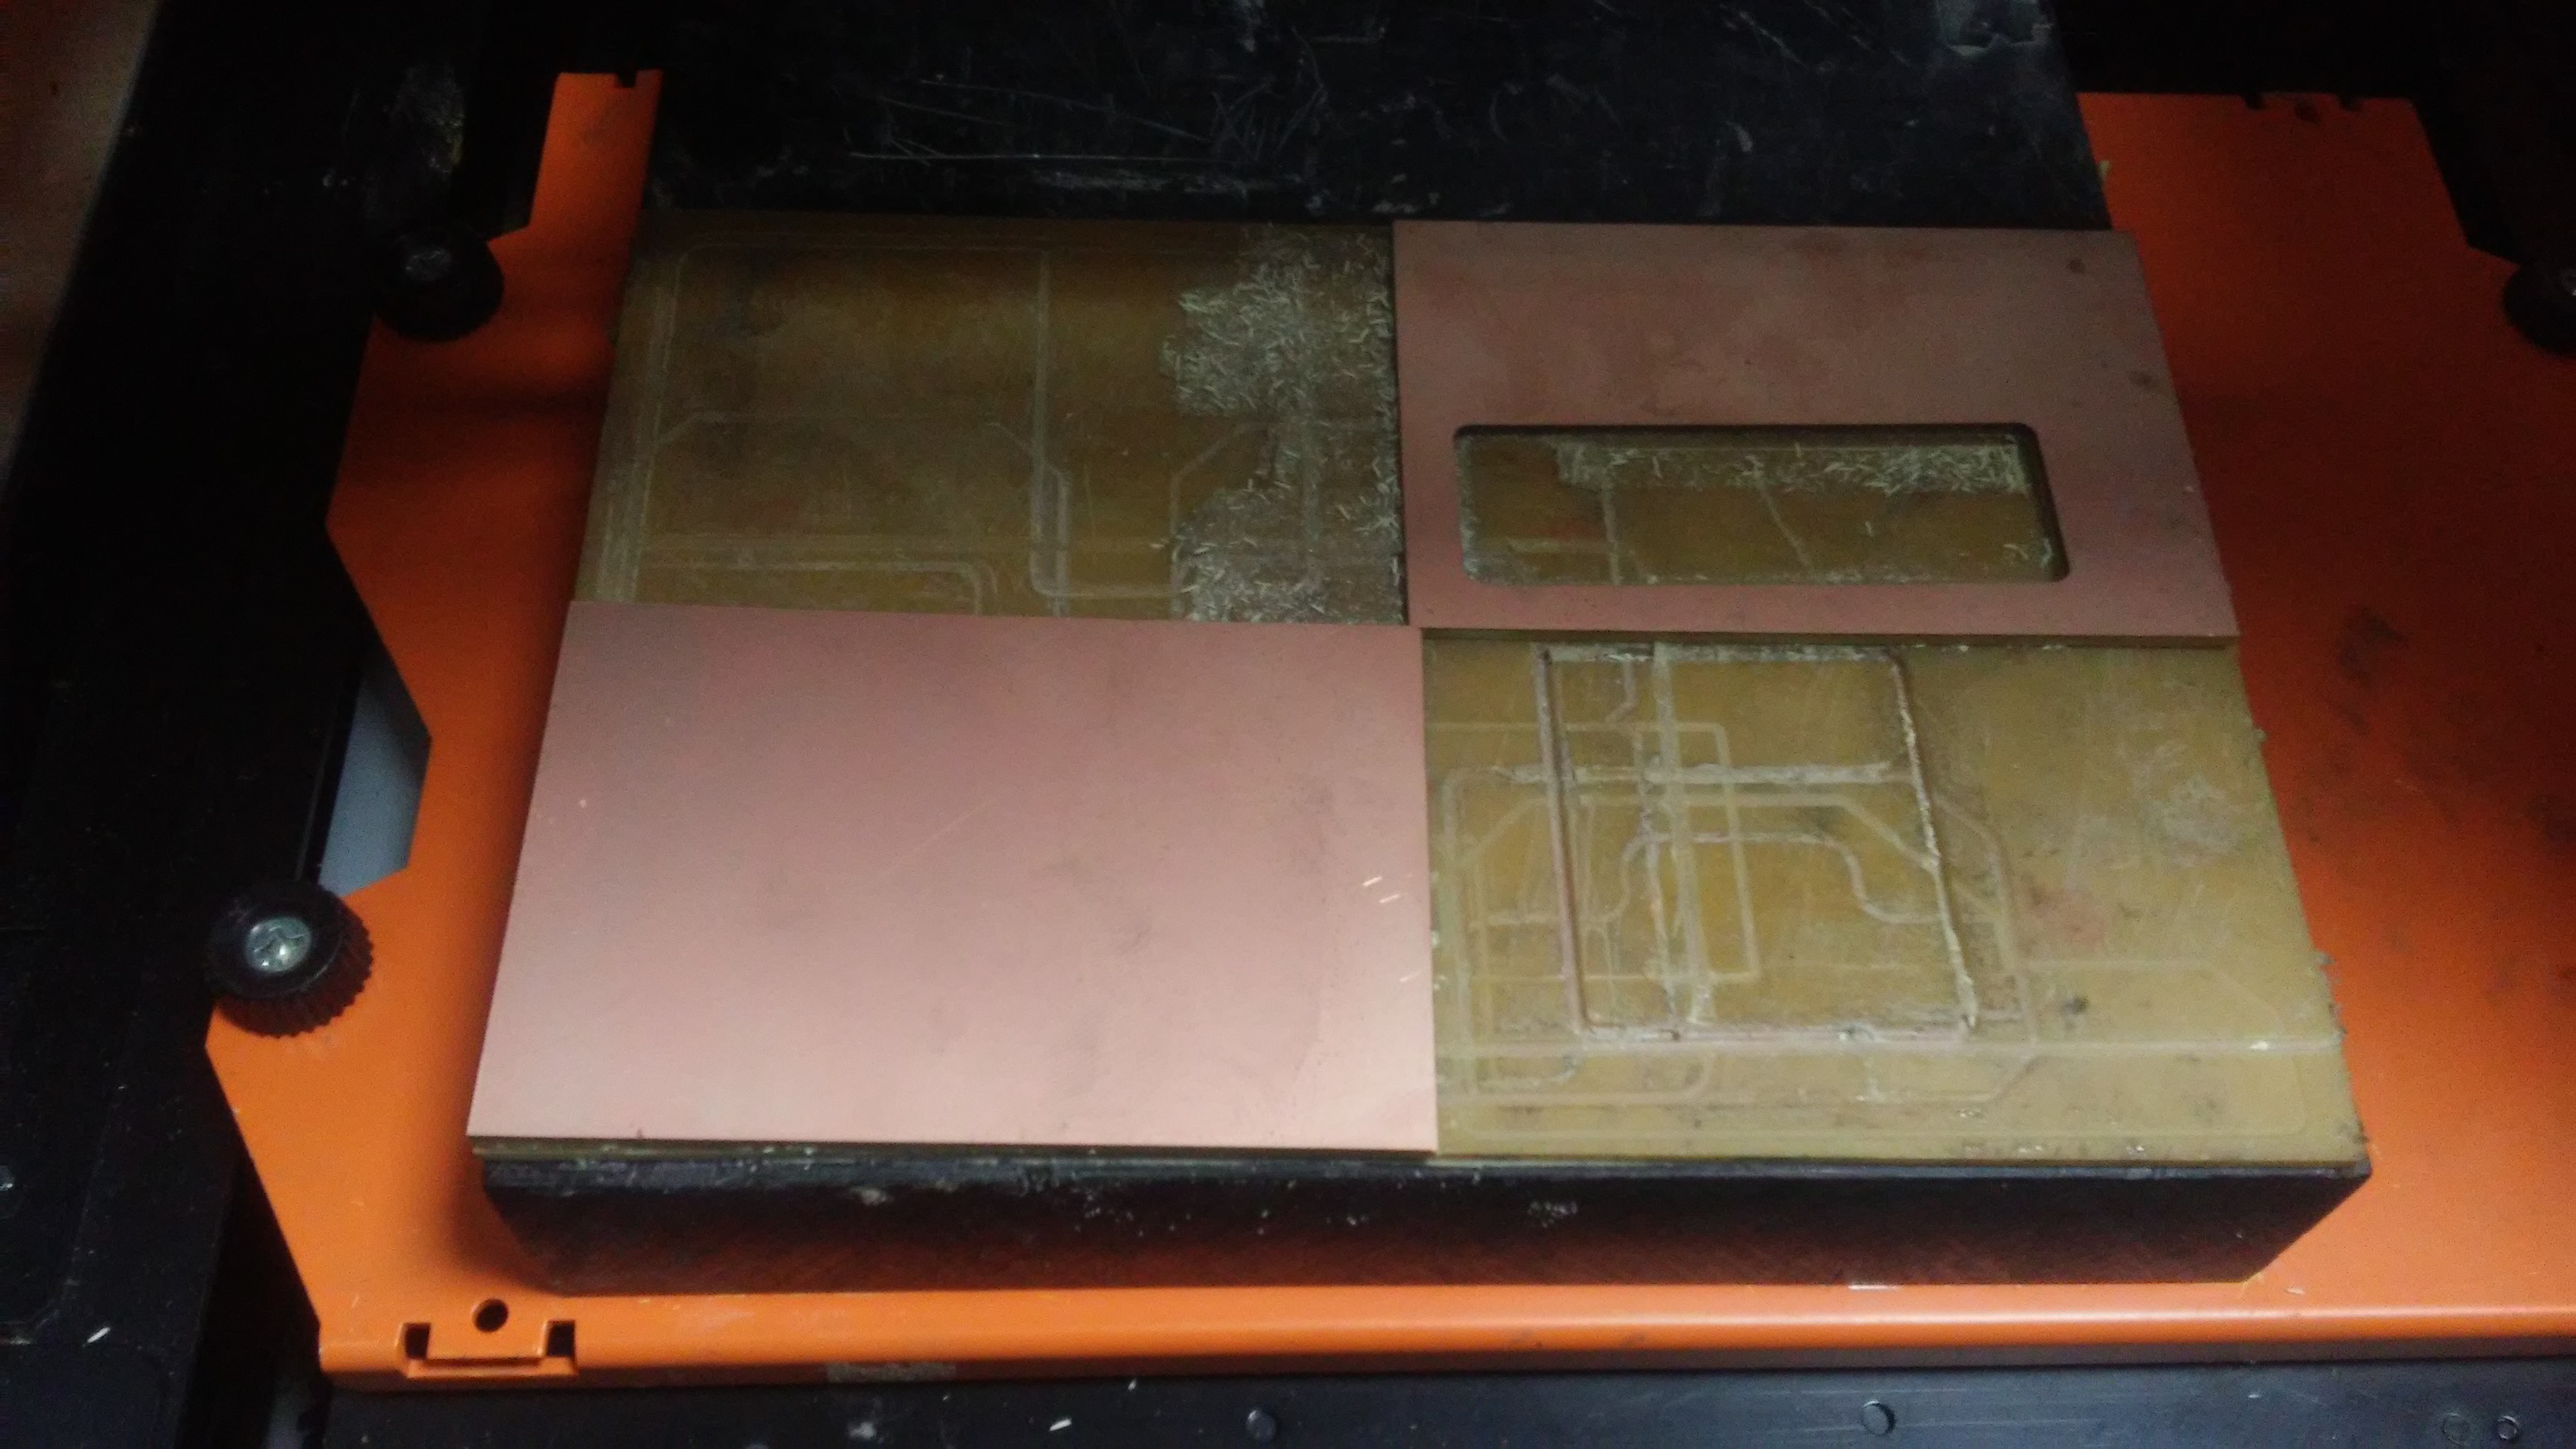 Img: Placed PCB